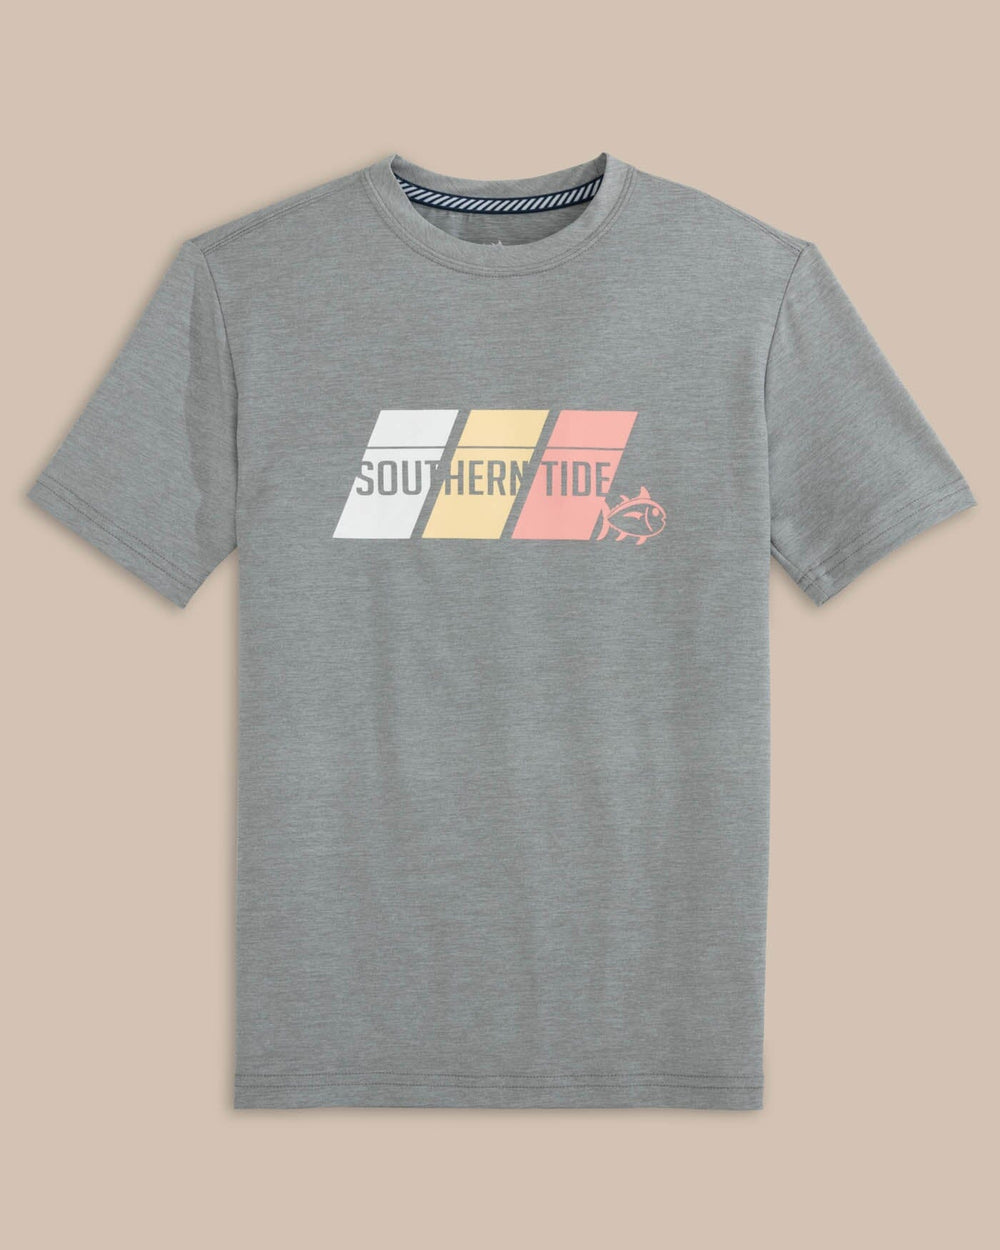 The front view of the Southern Tide Kids ST Tri Block Heather Short Sleeve Performance T-shirt by Southern Tide - Heather Platinum Grey